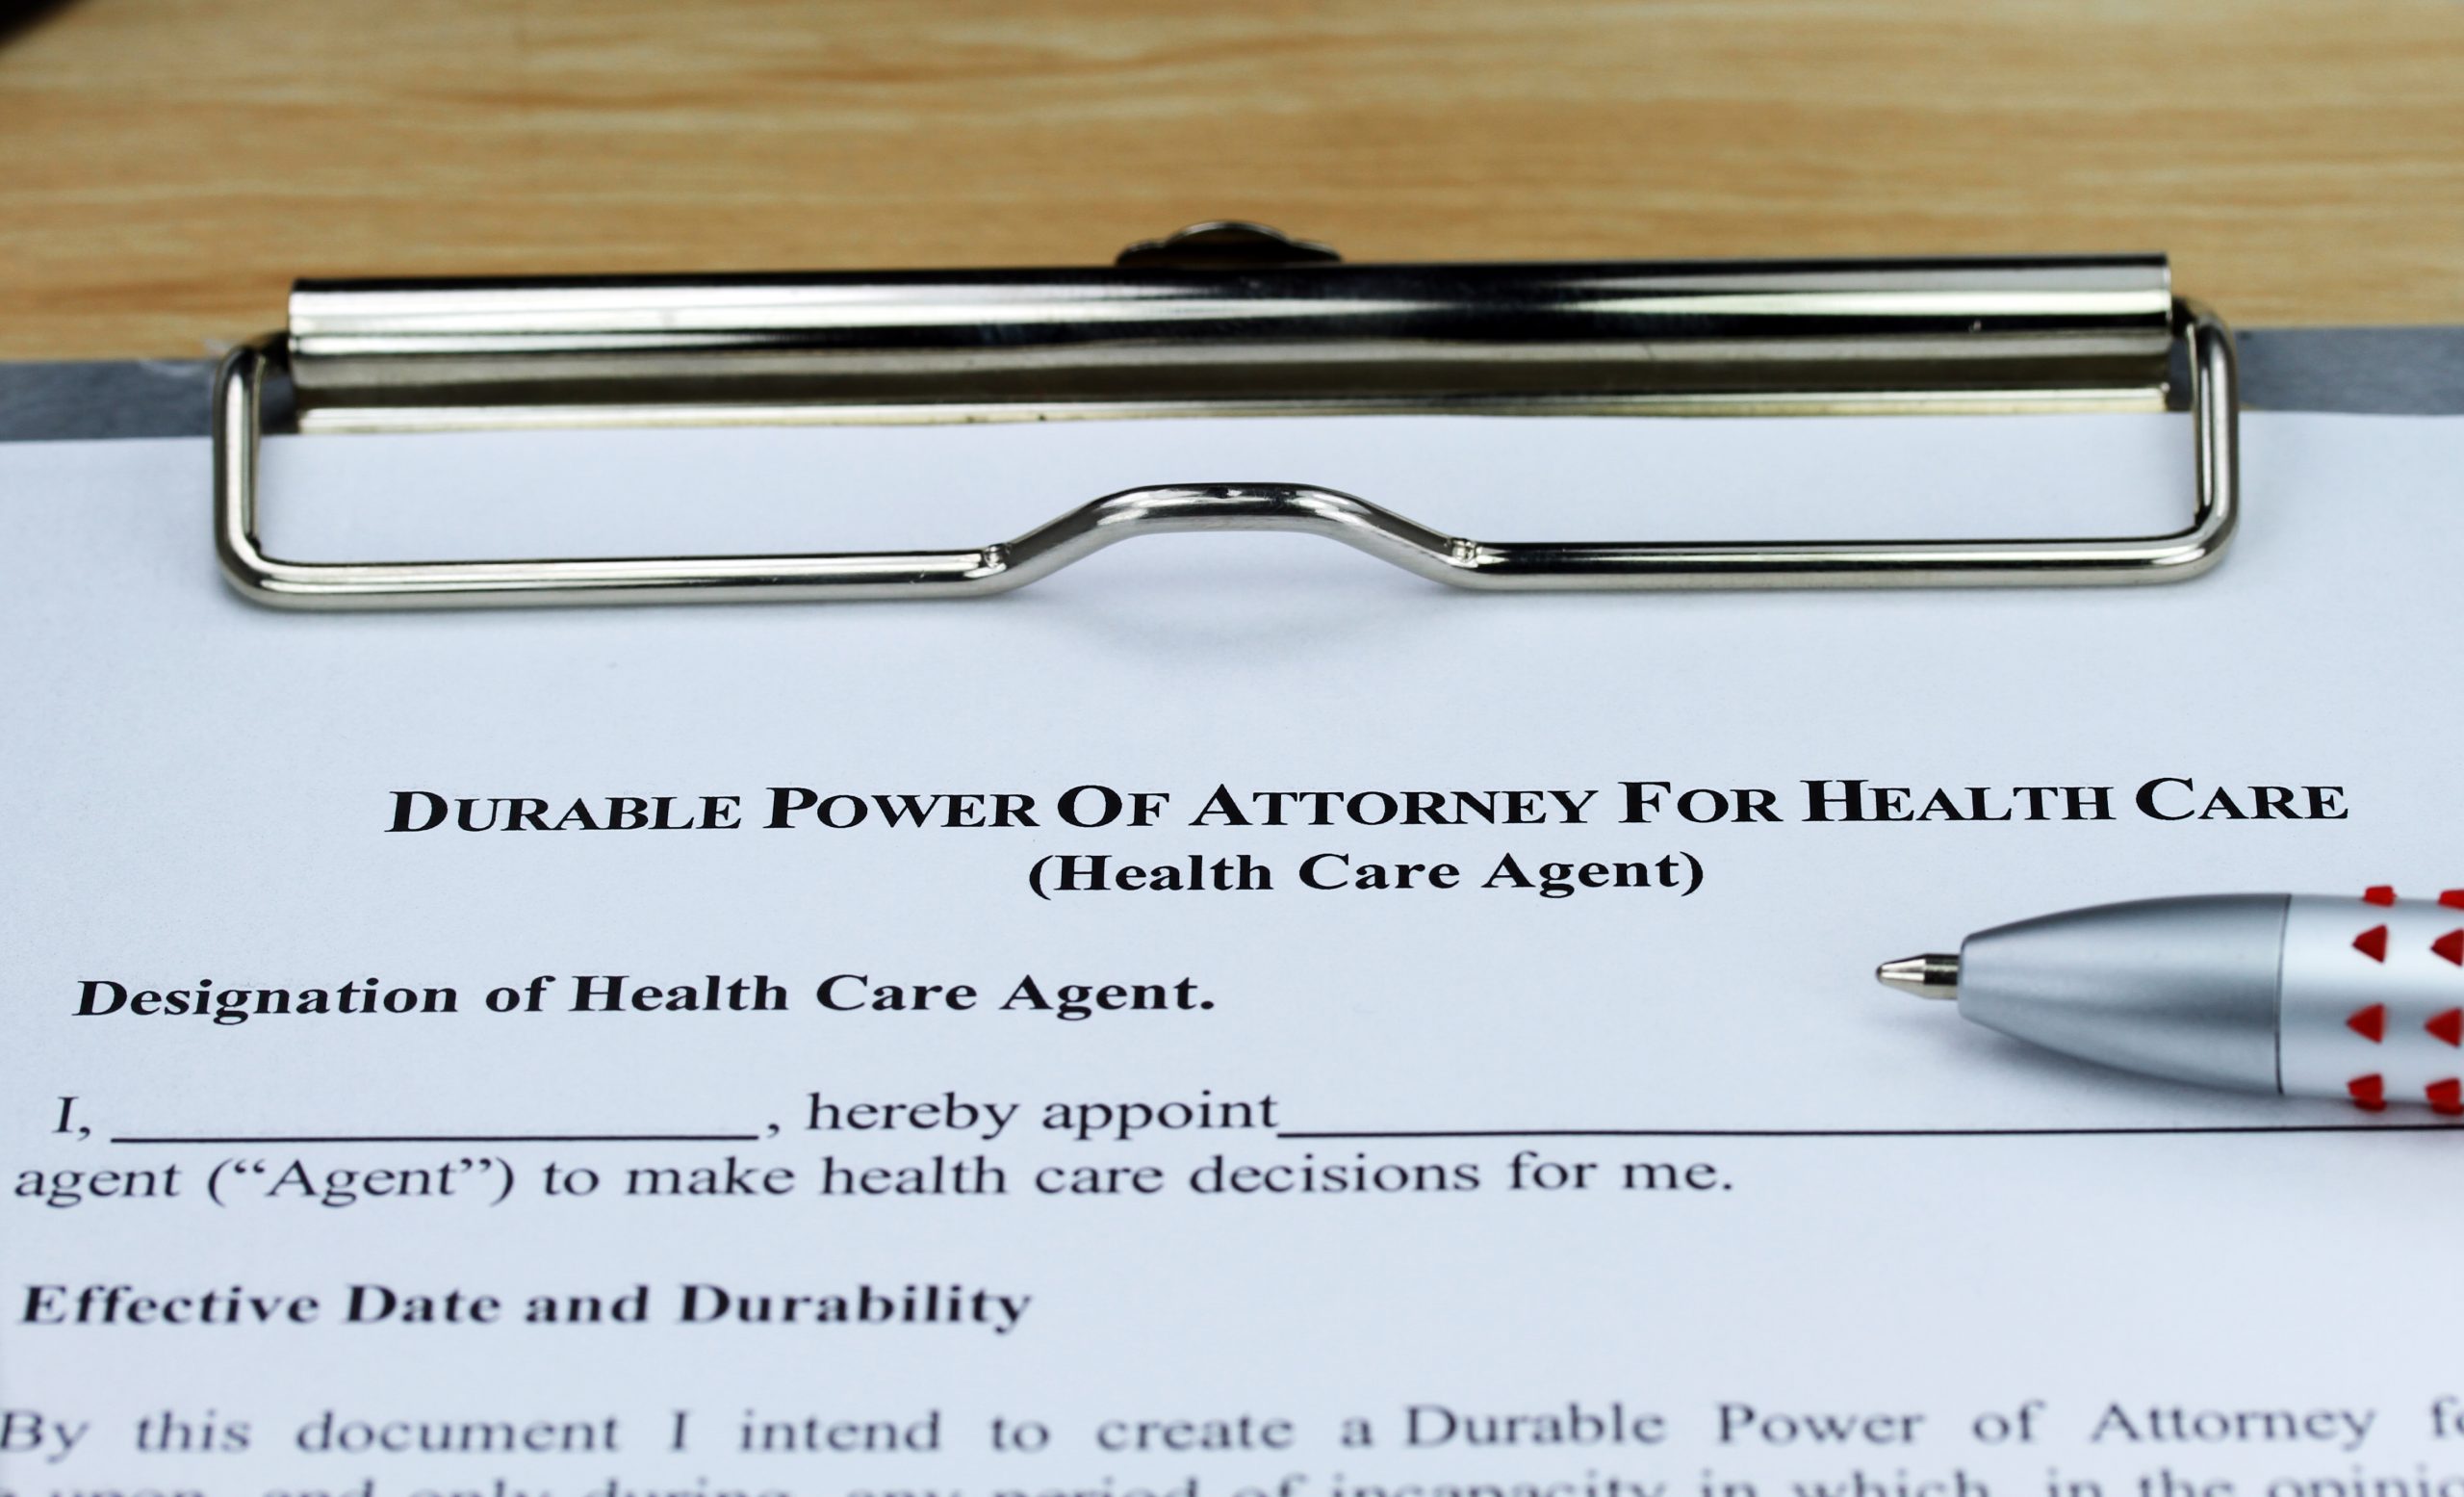 A Durable Power of Attorney form on a clipboard with a pen, ready to be filled out.